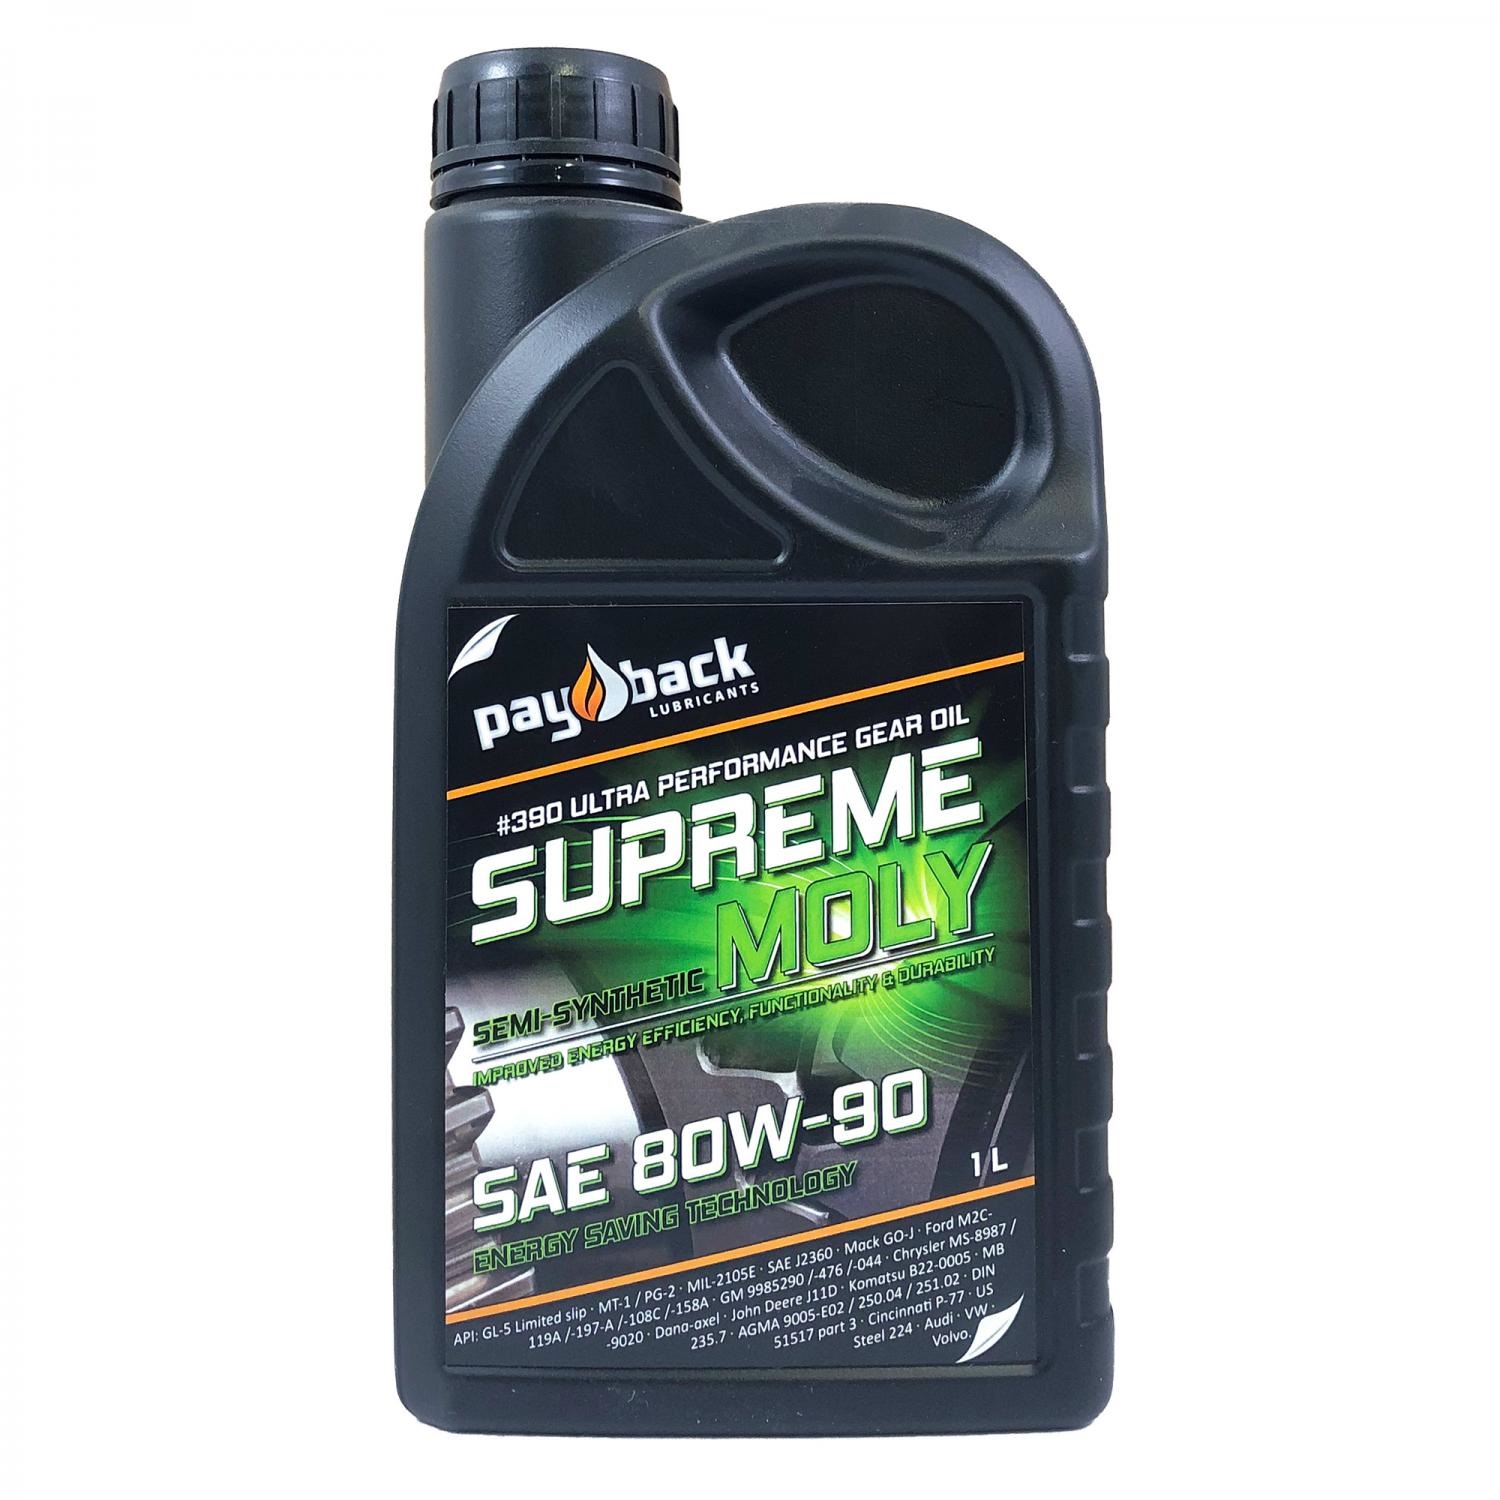 PAYBACK SUPREME MOLY 80w90 SYNTHETIC API GL-5 LS 1-liter